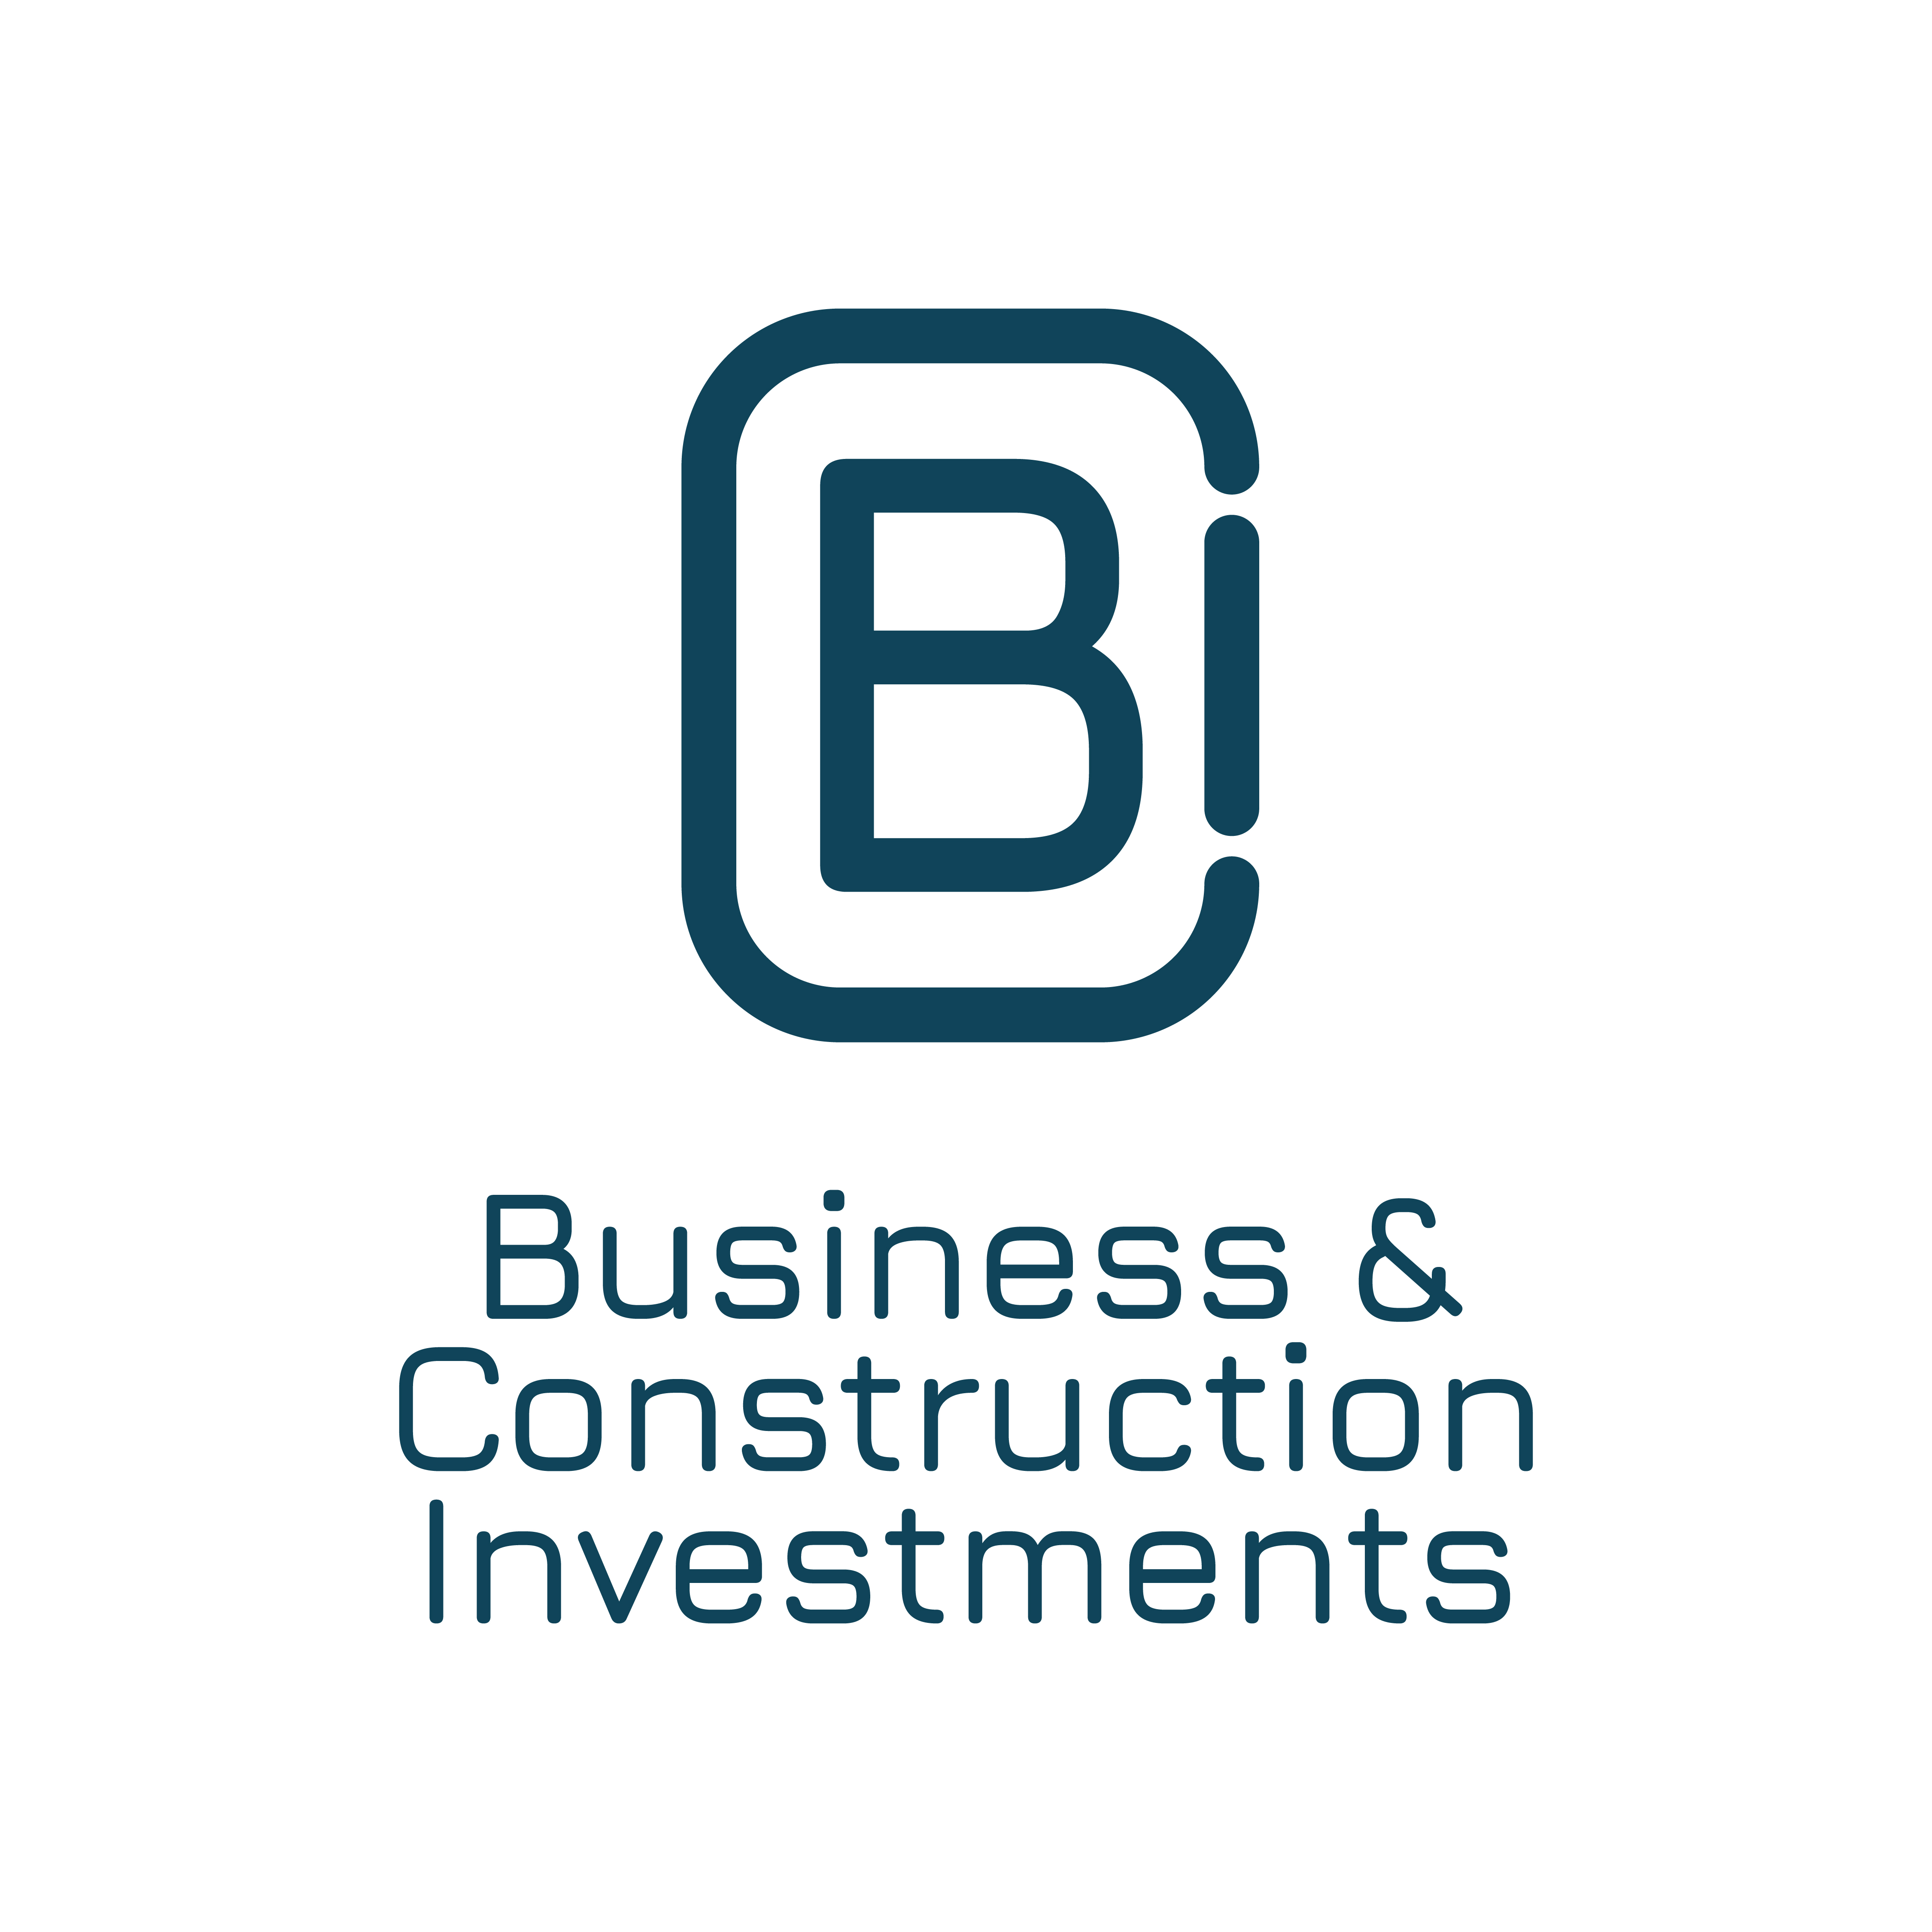 Business & Construction Investments, LLC Logo